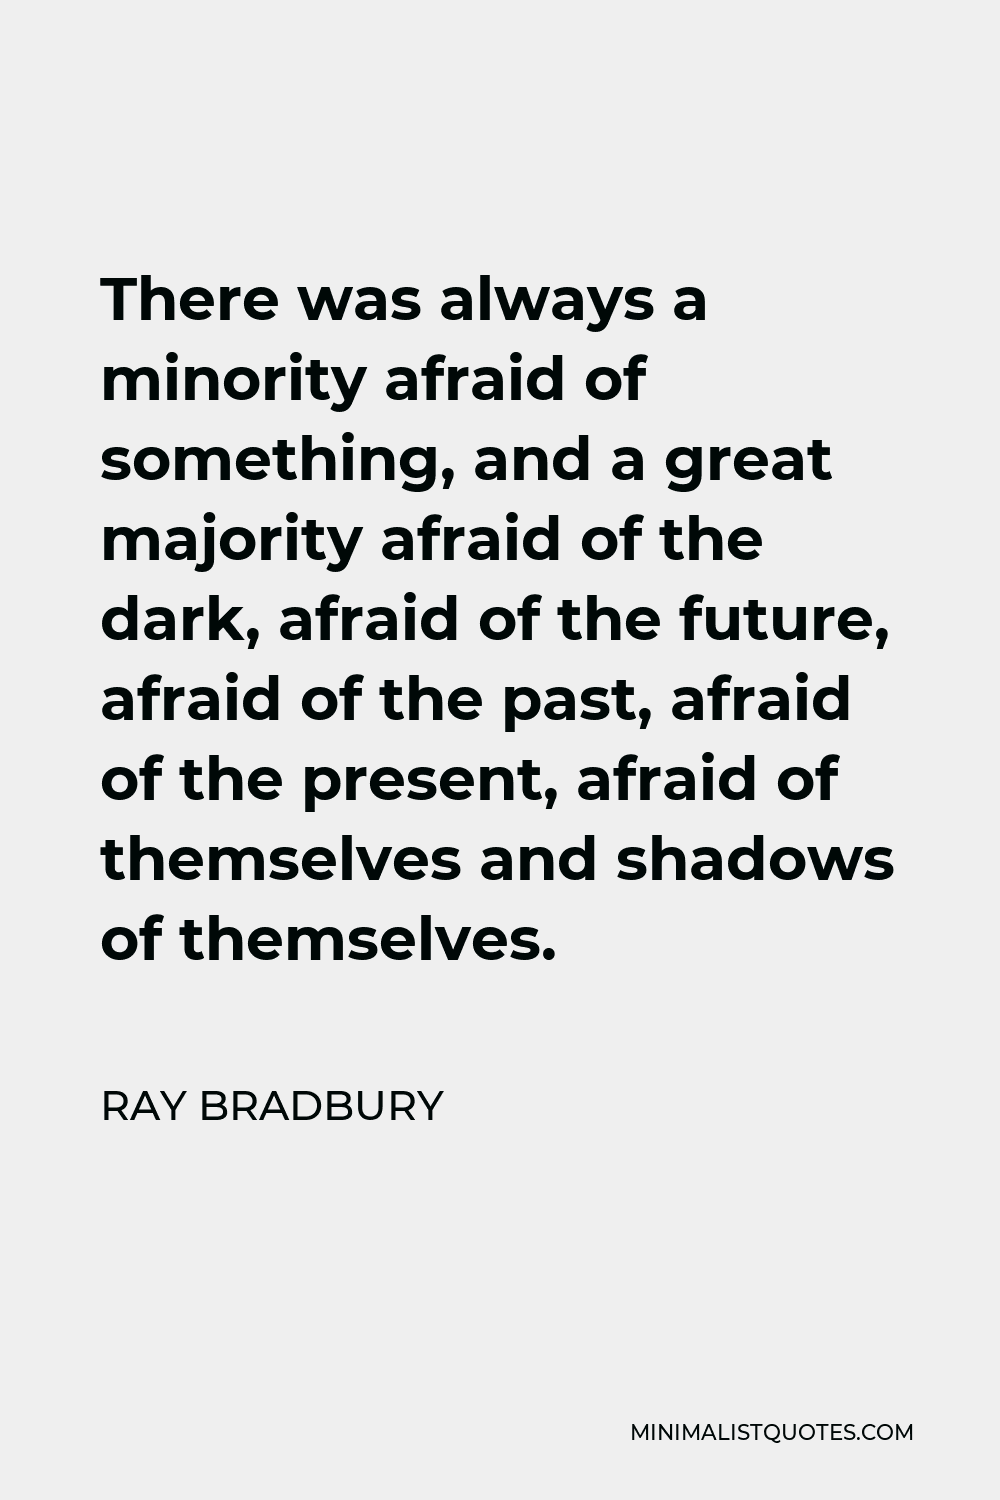 Ray Bradbury Quote - There was always a minority afraid of something, and a great majority afraid of the dark, afraid of the future, afraid of the past, afraid of the present, afraid of themselves and shadows of themselves.